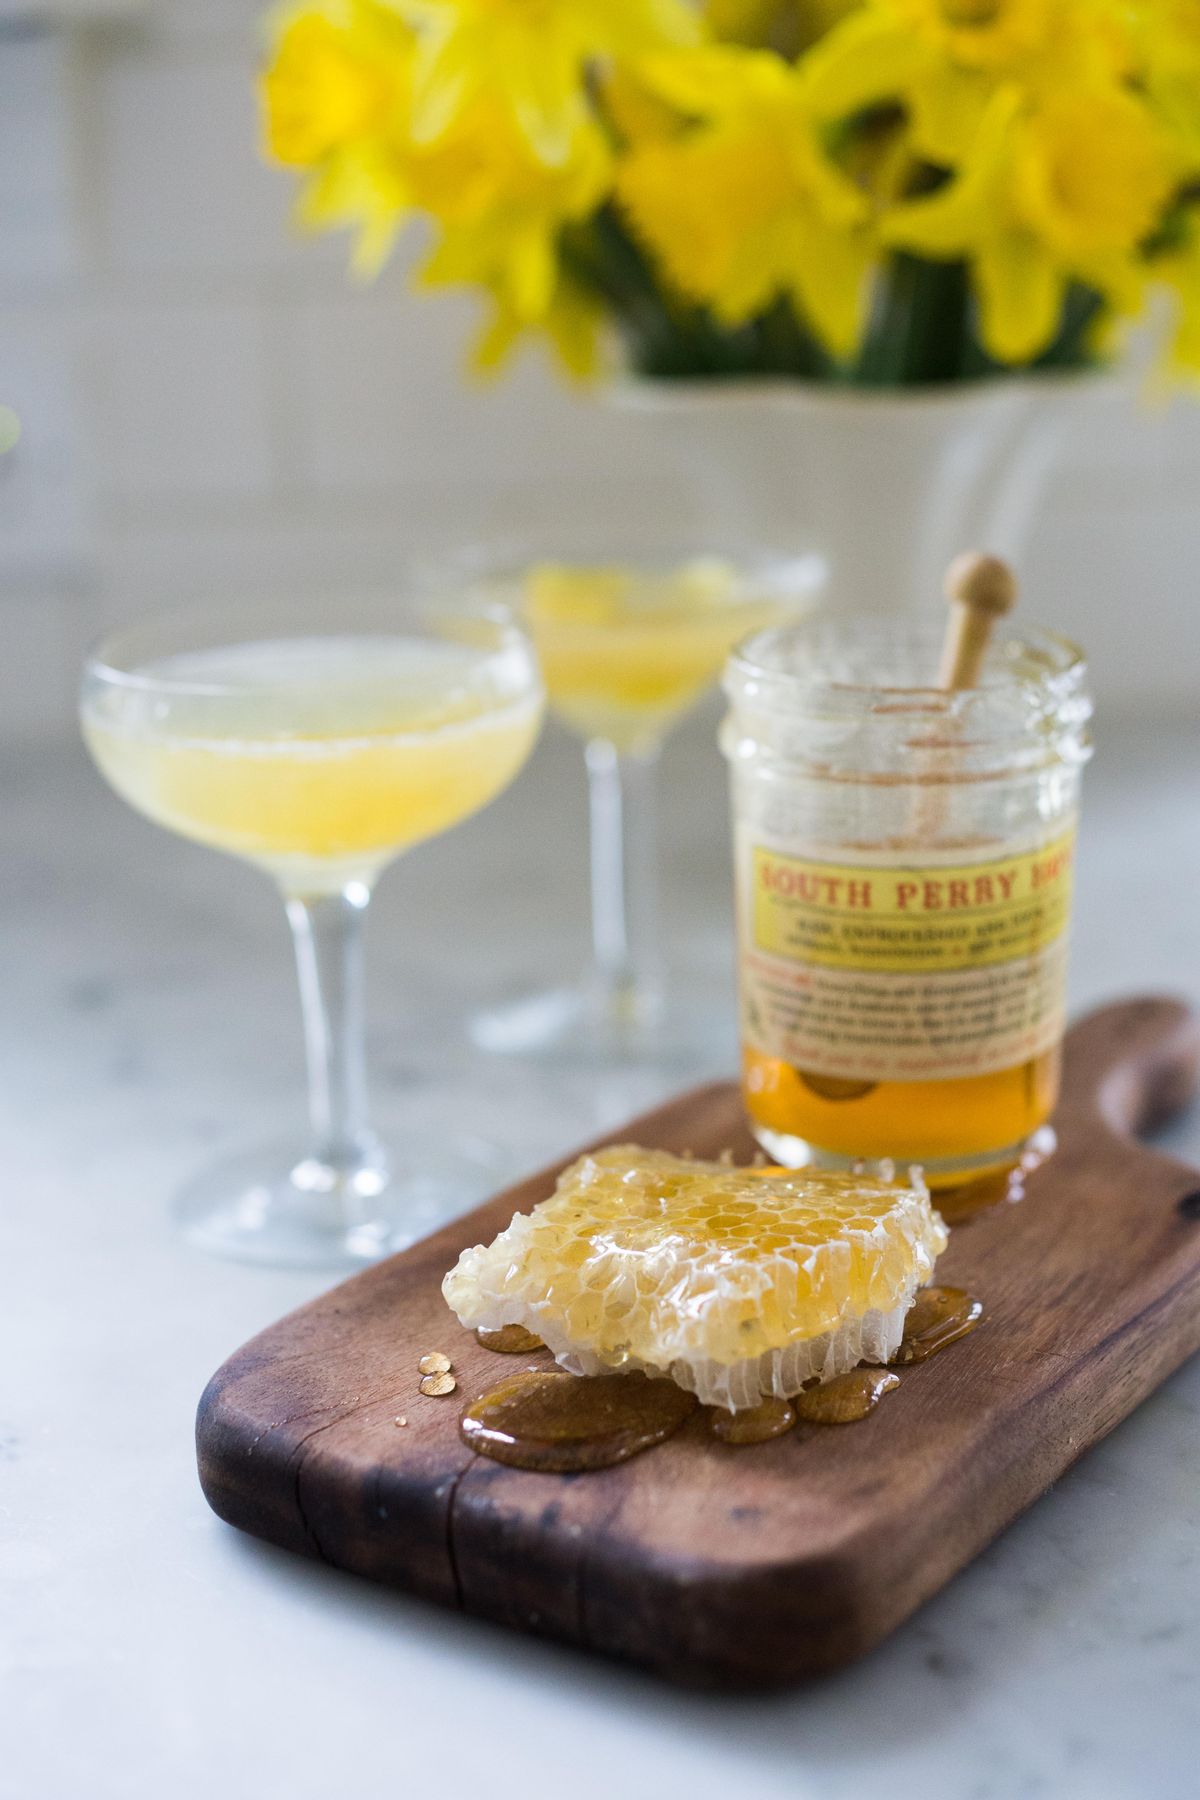 Honey is a key ingredient in the Bee’s Knees, which also includes gin and citrus. (Sylvia Fountaine)